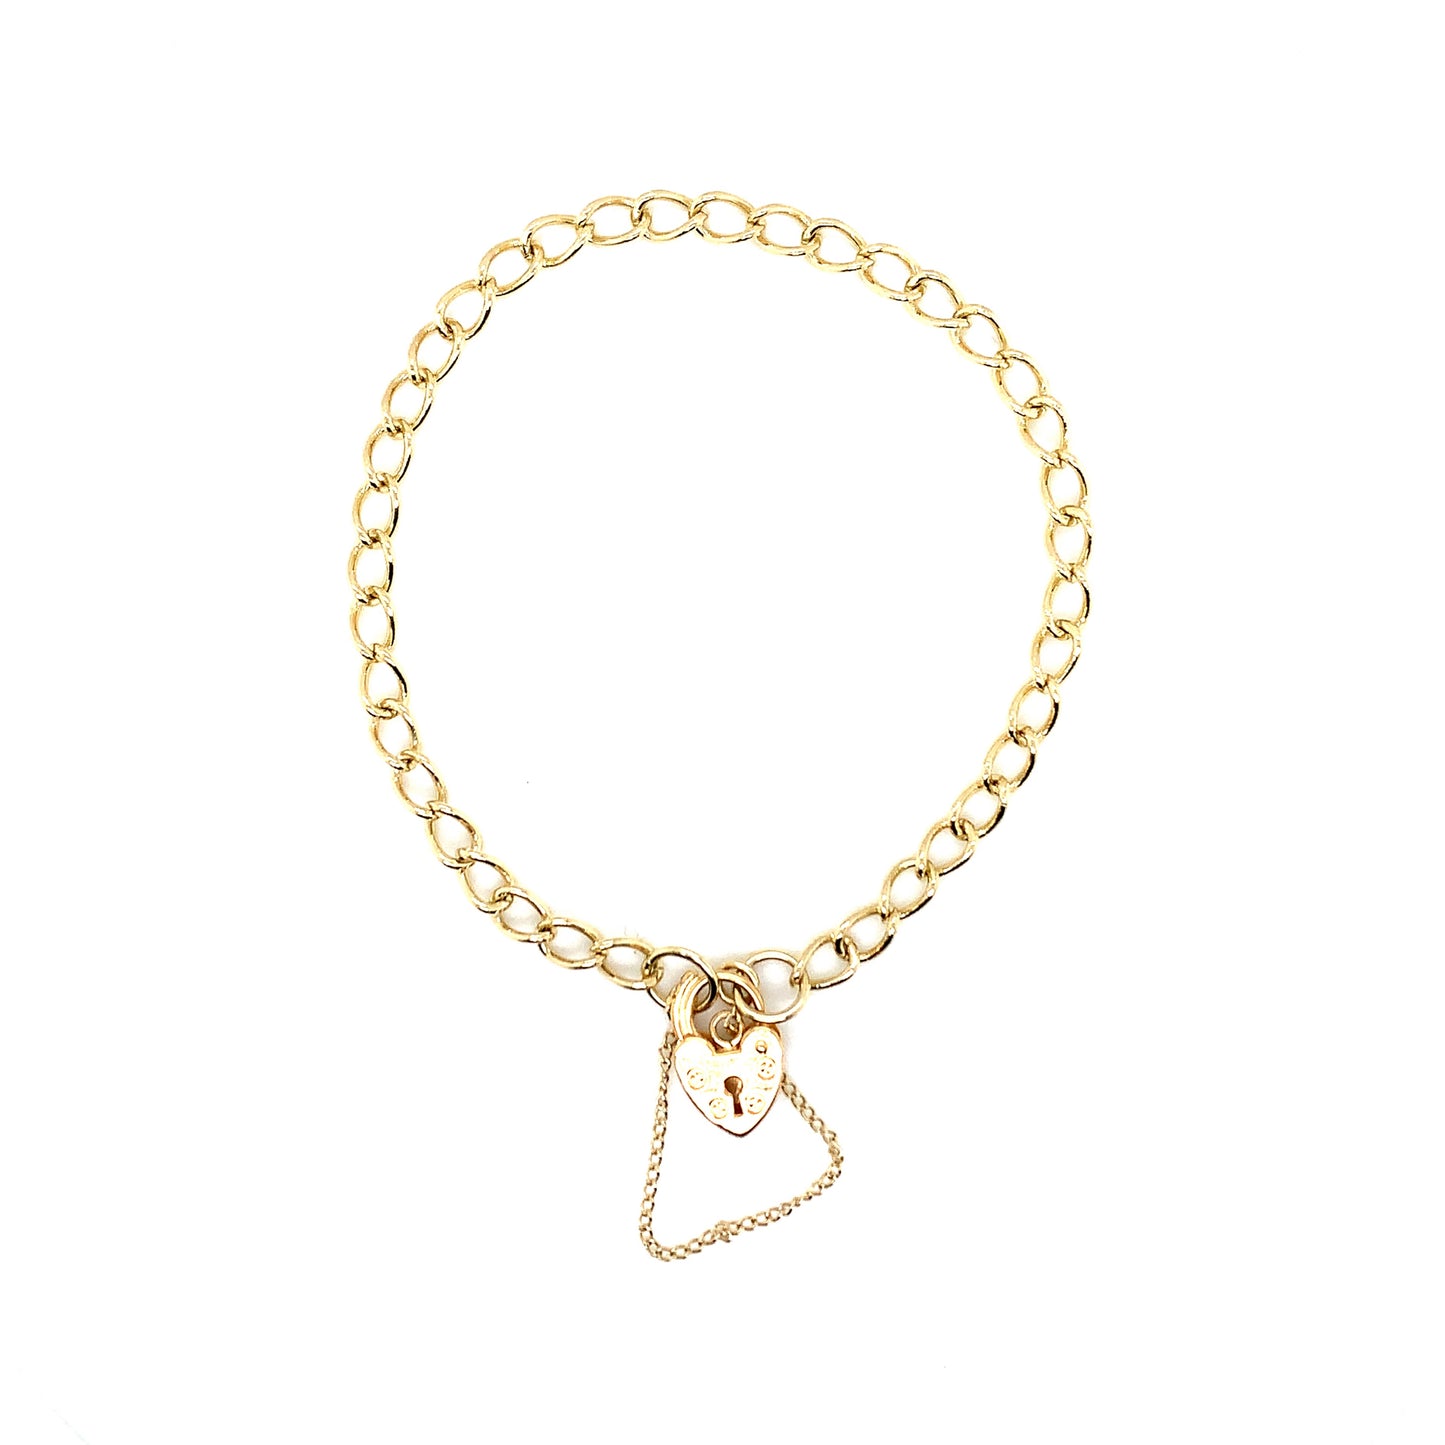 9ct Gold Open Curb Charm Bracelet with Padlock